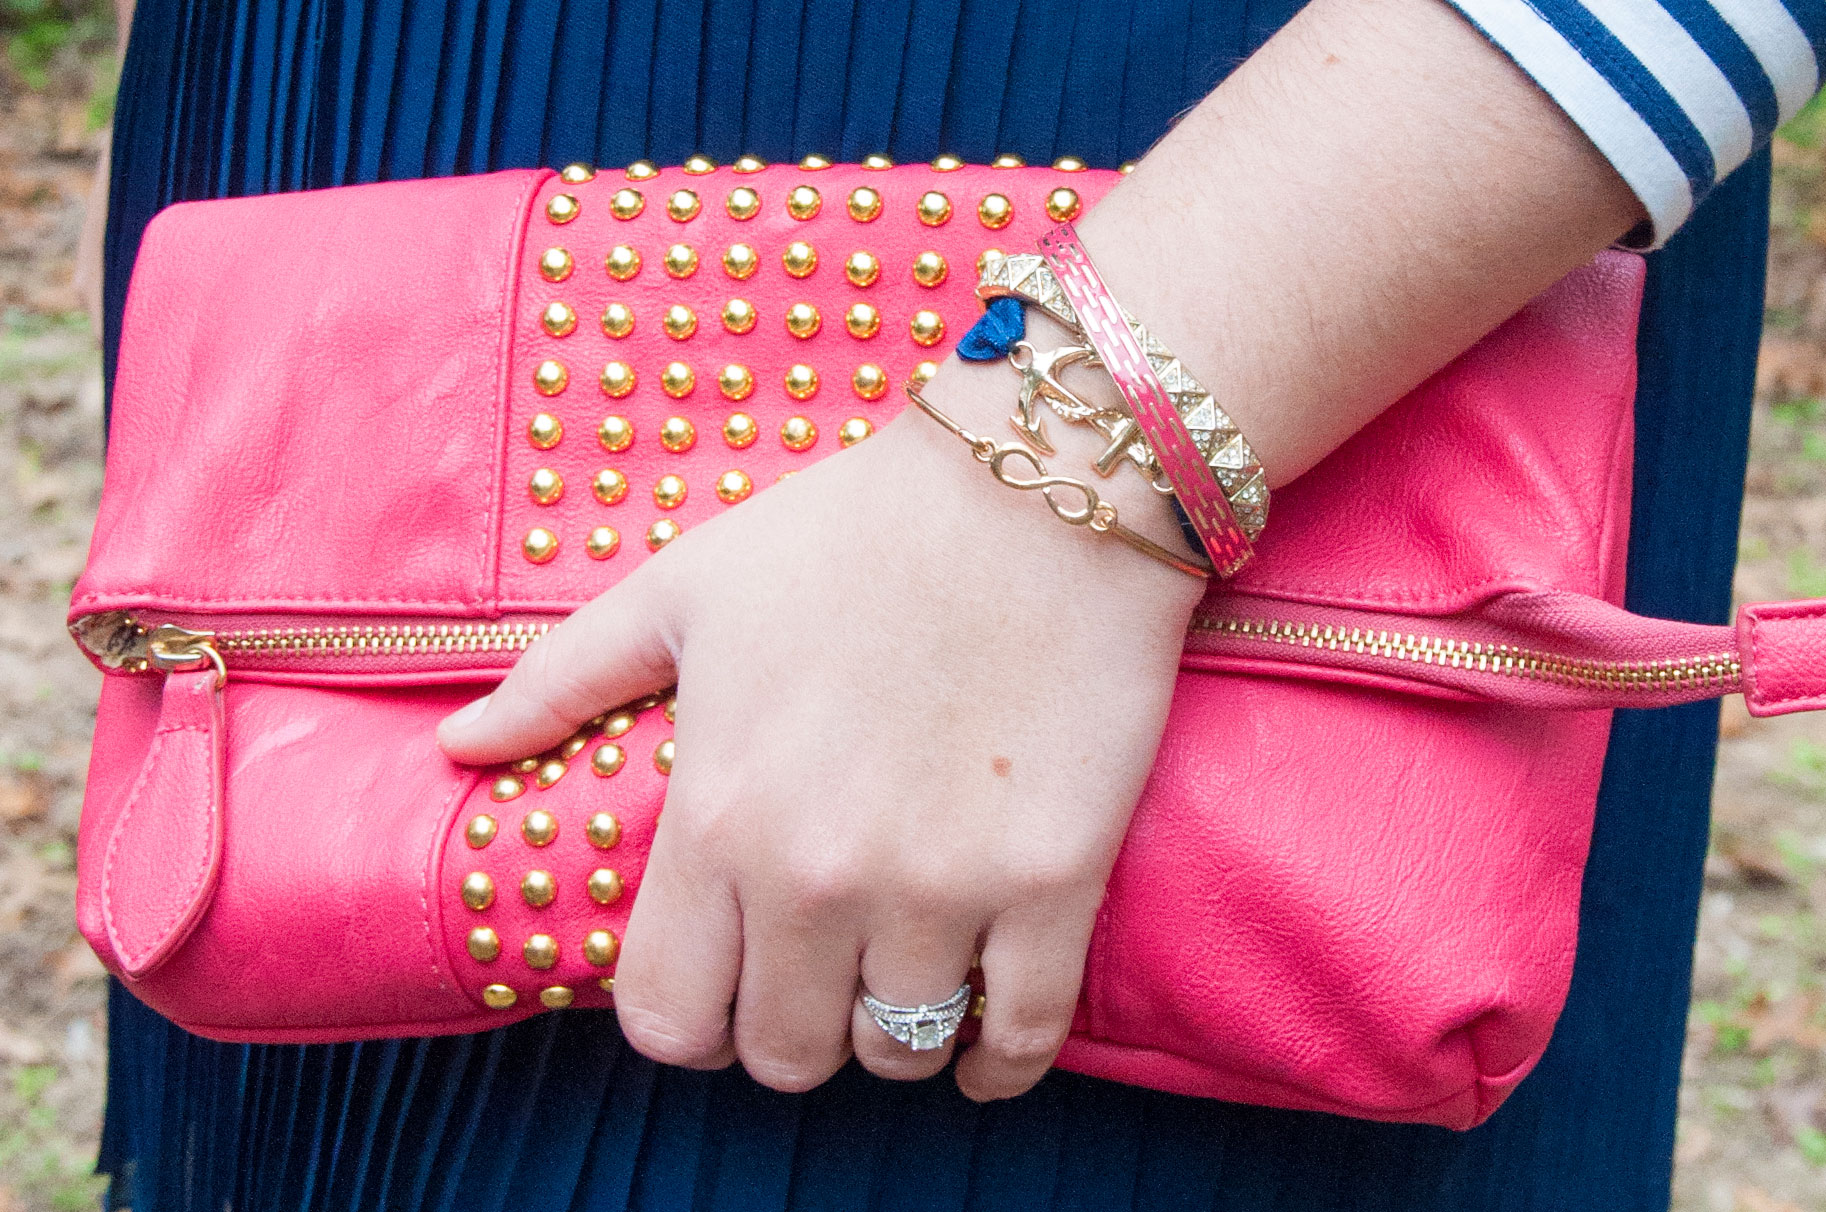 PInk and gold clutch